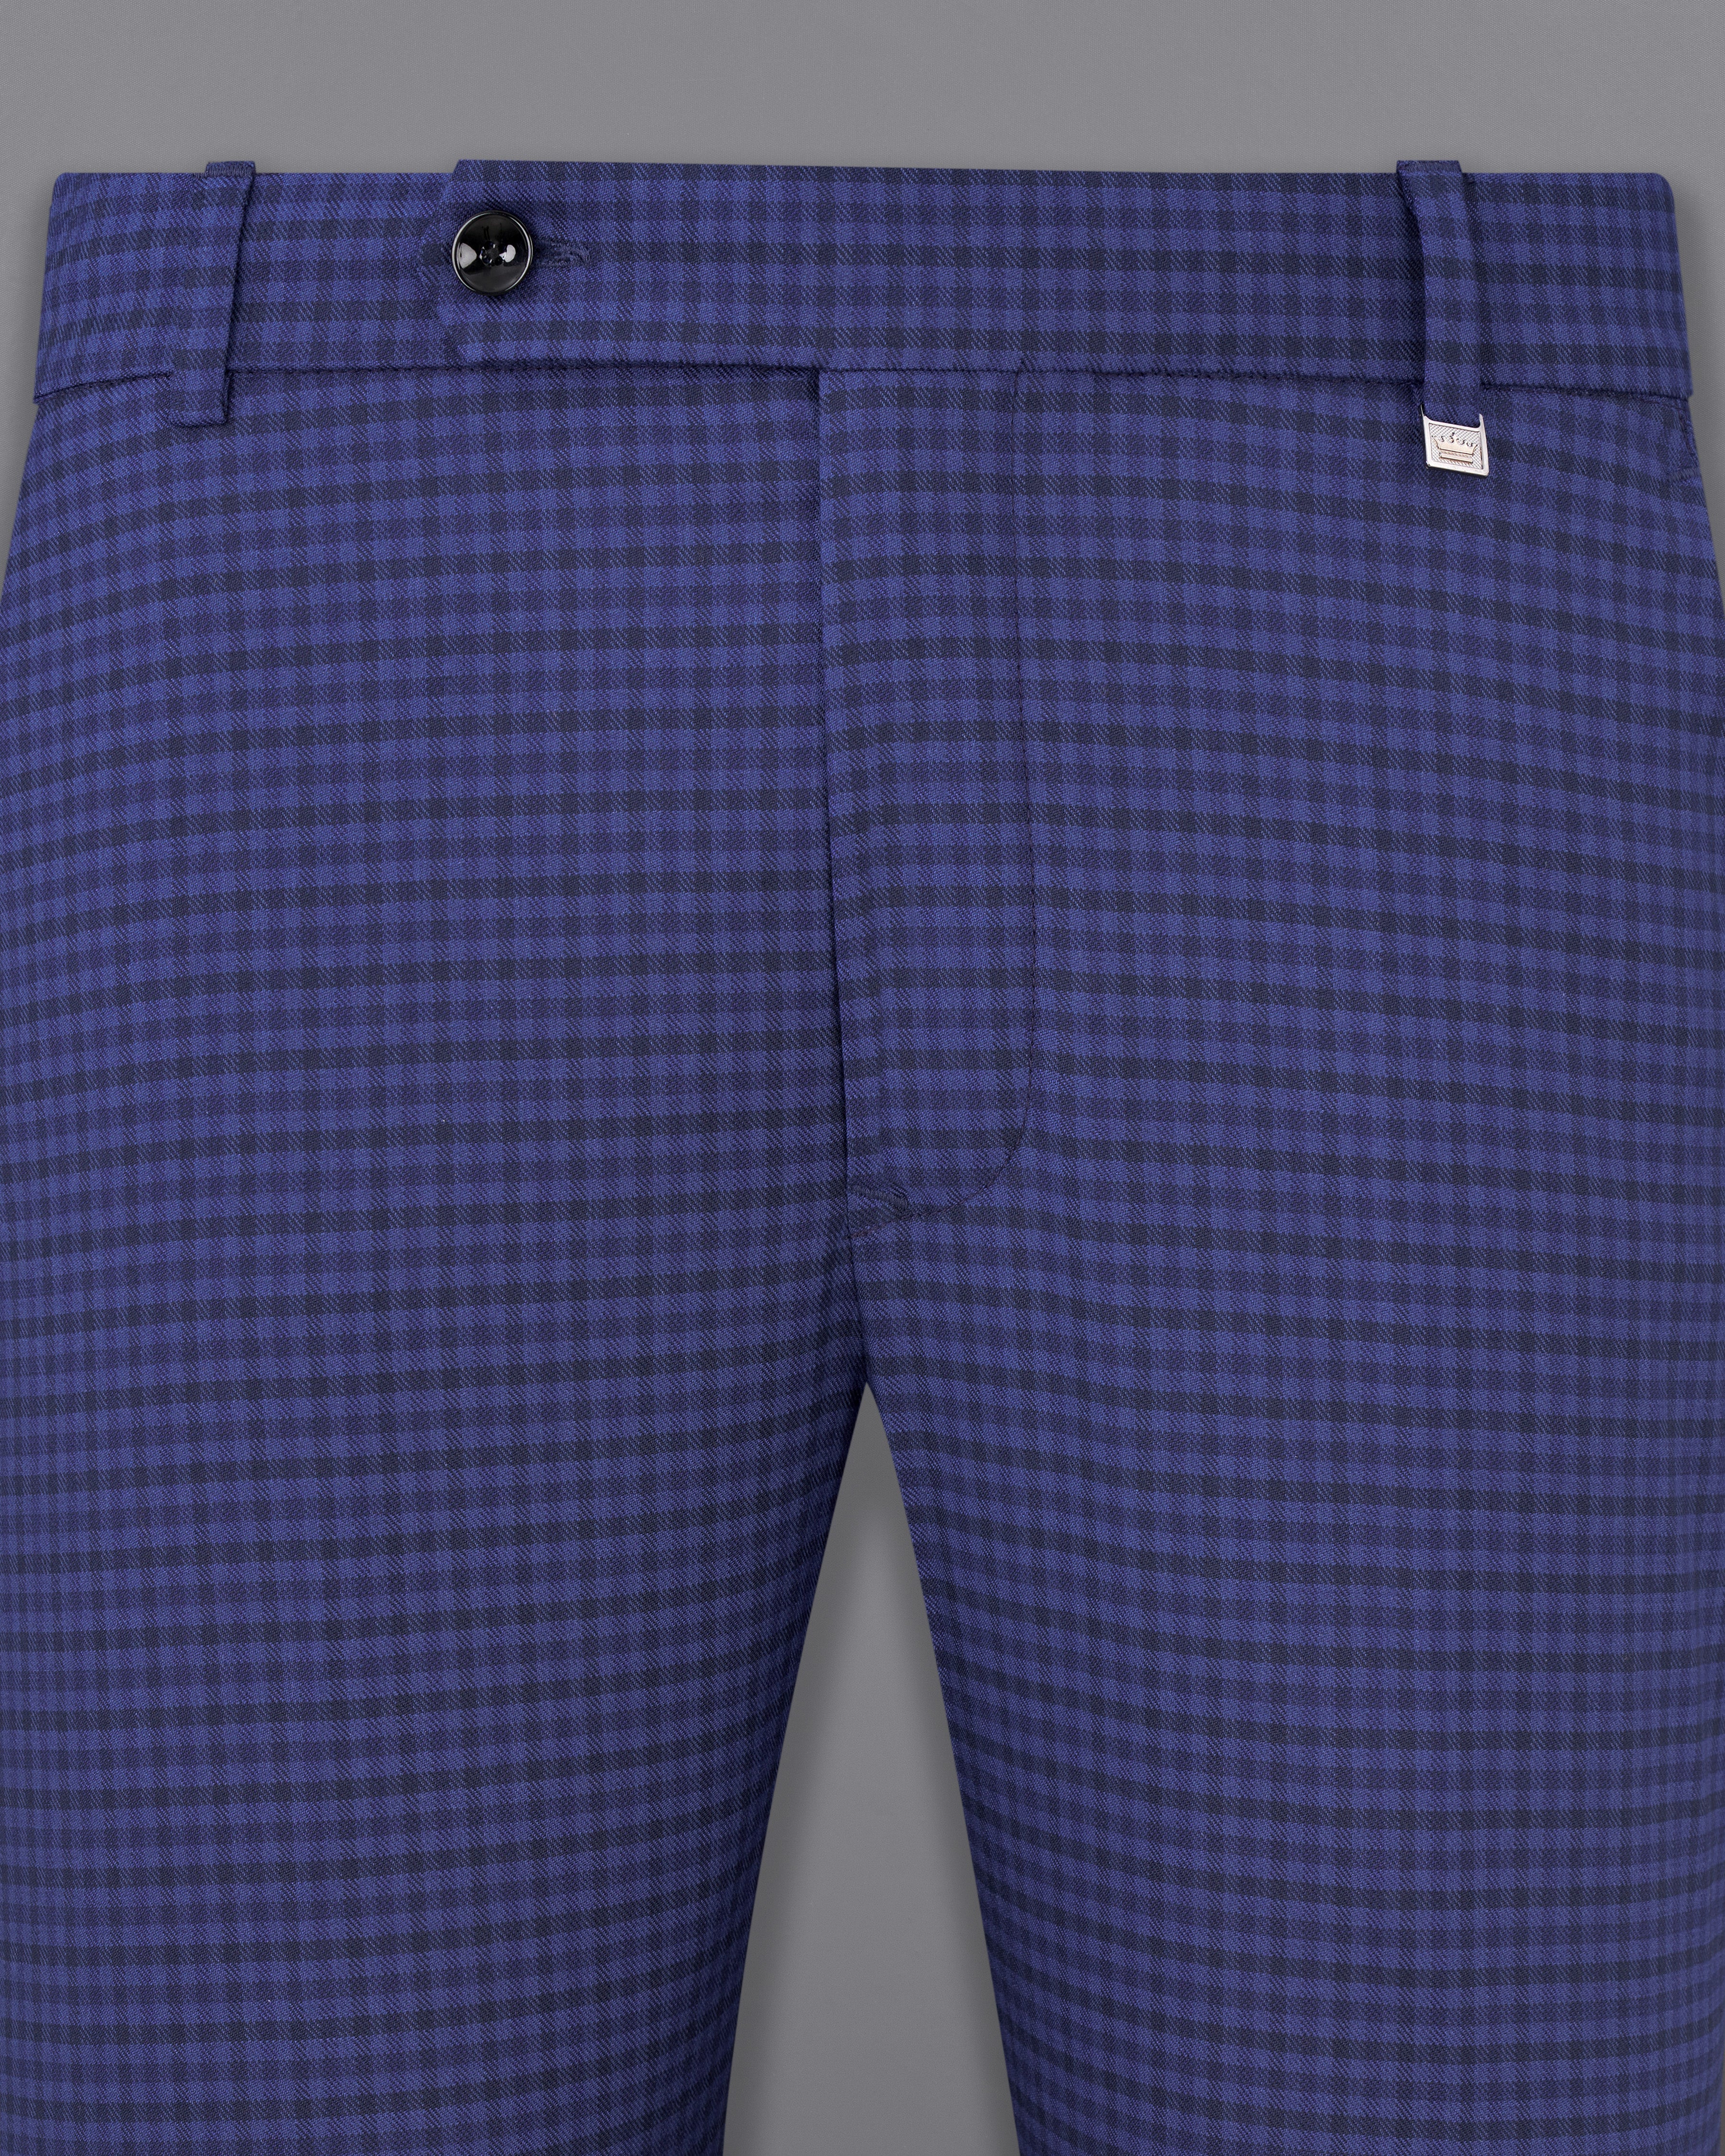 Victoria Blue Gingham Checkered Pants T2494-28, T2494-30, T2494-32, T2494-34, T2494-36, T2494-38, T2494-40, T2494-42, T2494-44